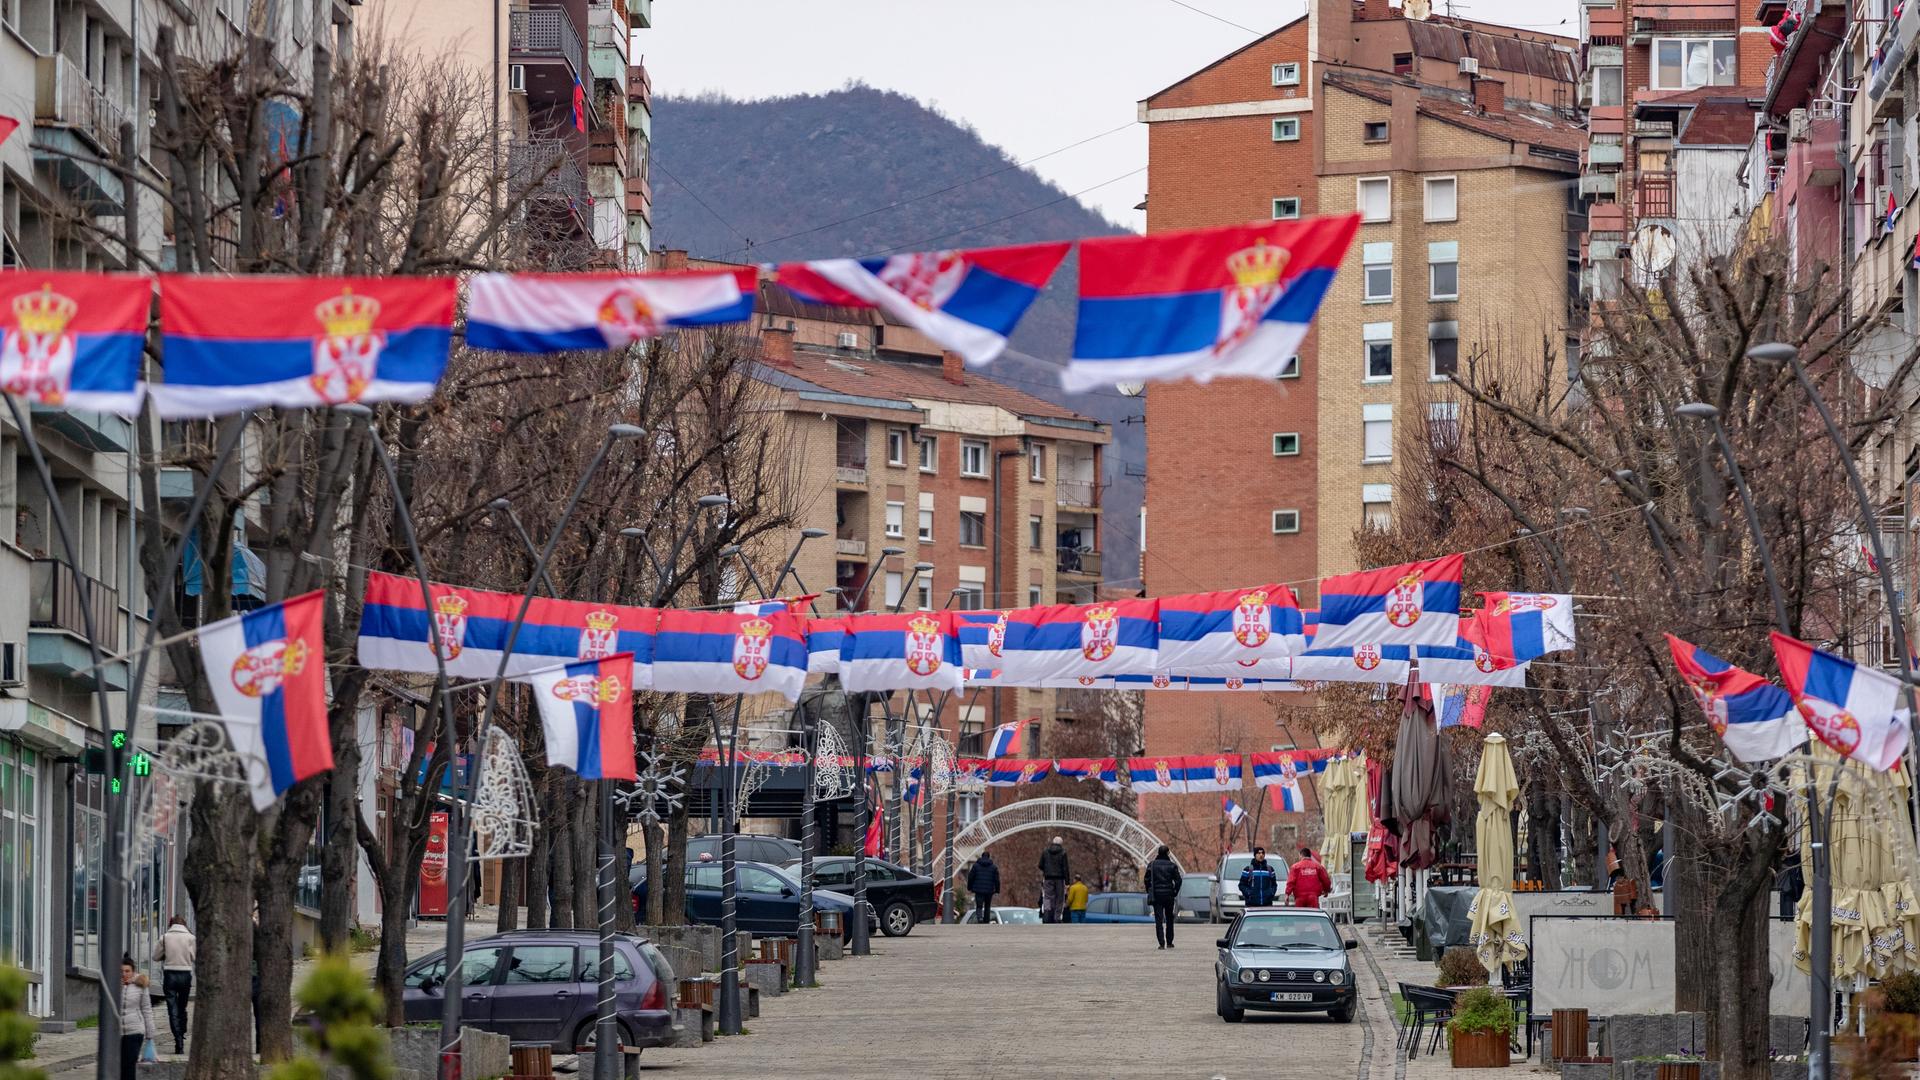 MITROVICA, KOSOVO - DECEMBER 28: A view of King Peter One road with multiple Serbian flags hanged on wires near the Mitrovica Bridge over the Ibar River in Northern Mitrovica, Kosovo as tension between Kosovo and Serbia continue on December 28, 2022. Tensions between Kosovo and Serbia have escalated since the detention of former Serbian police officer Dejan Pantic on suspicion of attacking electio